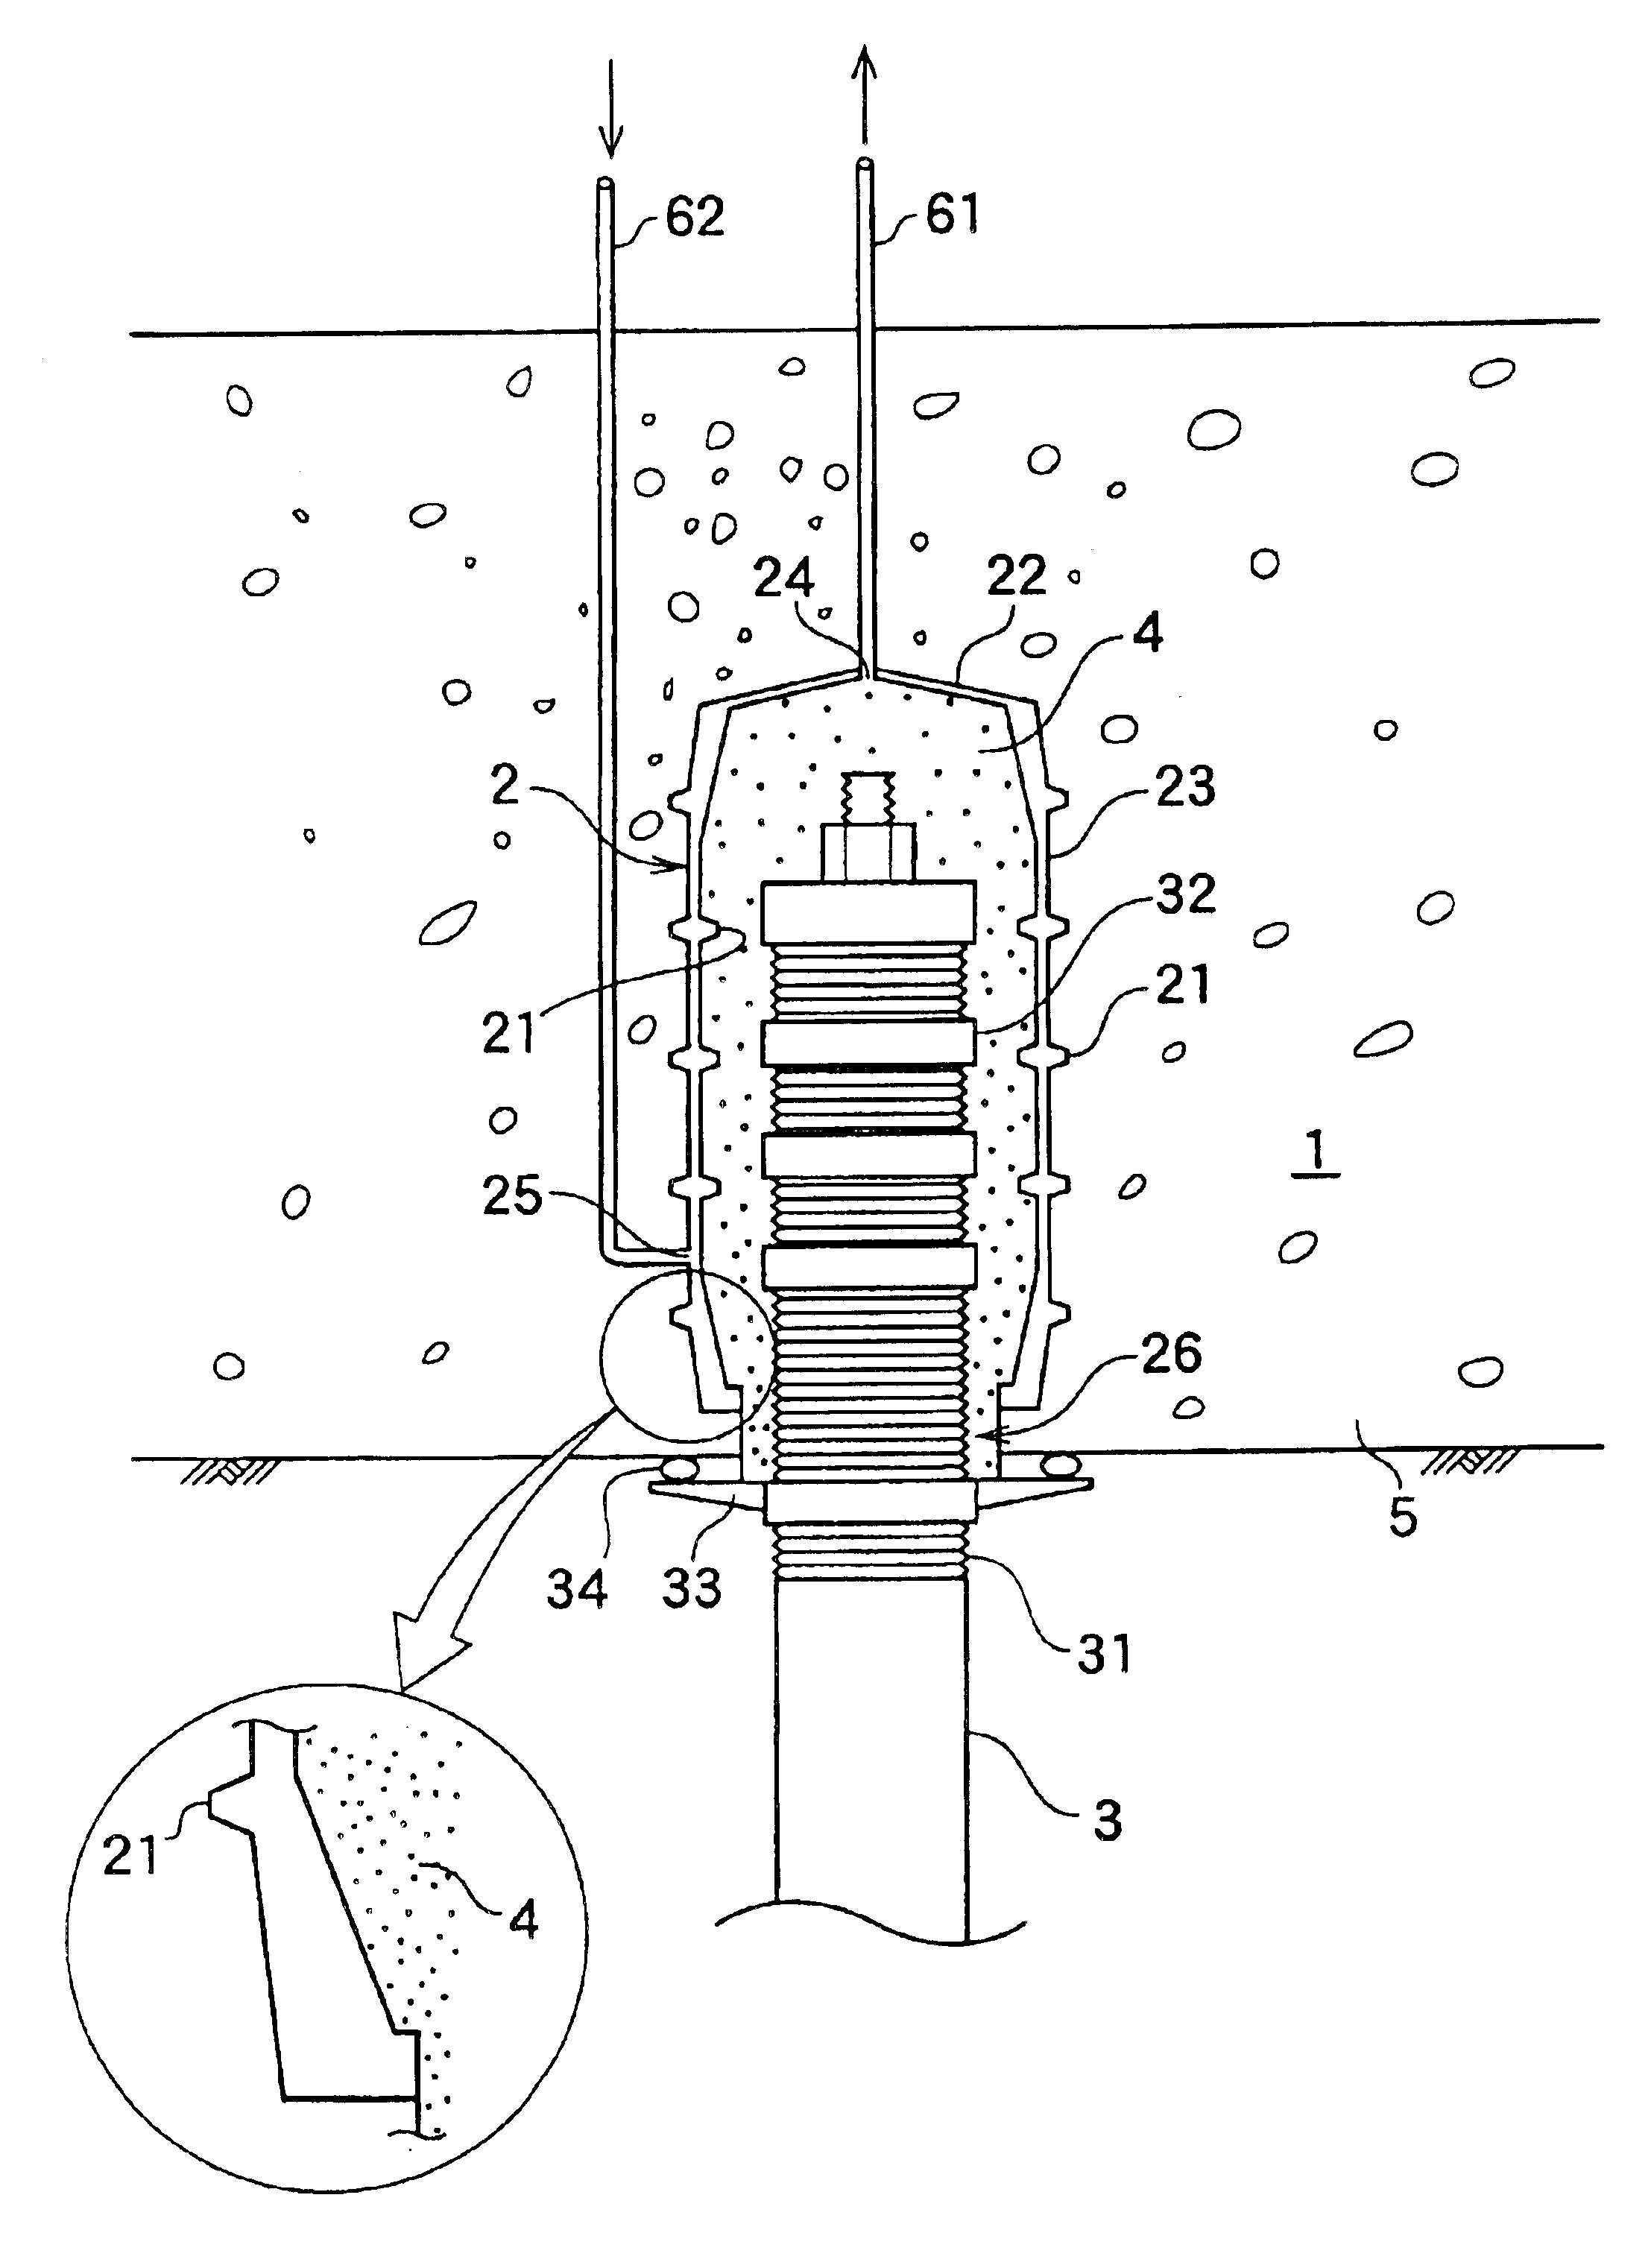 Structure of pile head joint portion and pile head fitting tubular body